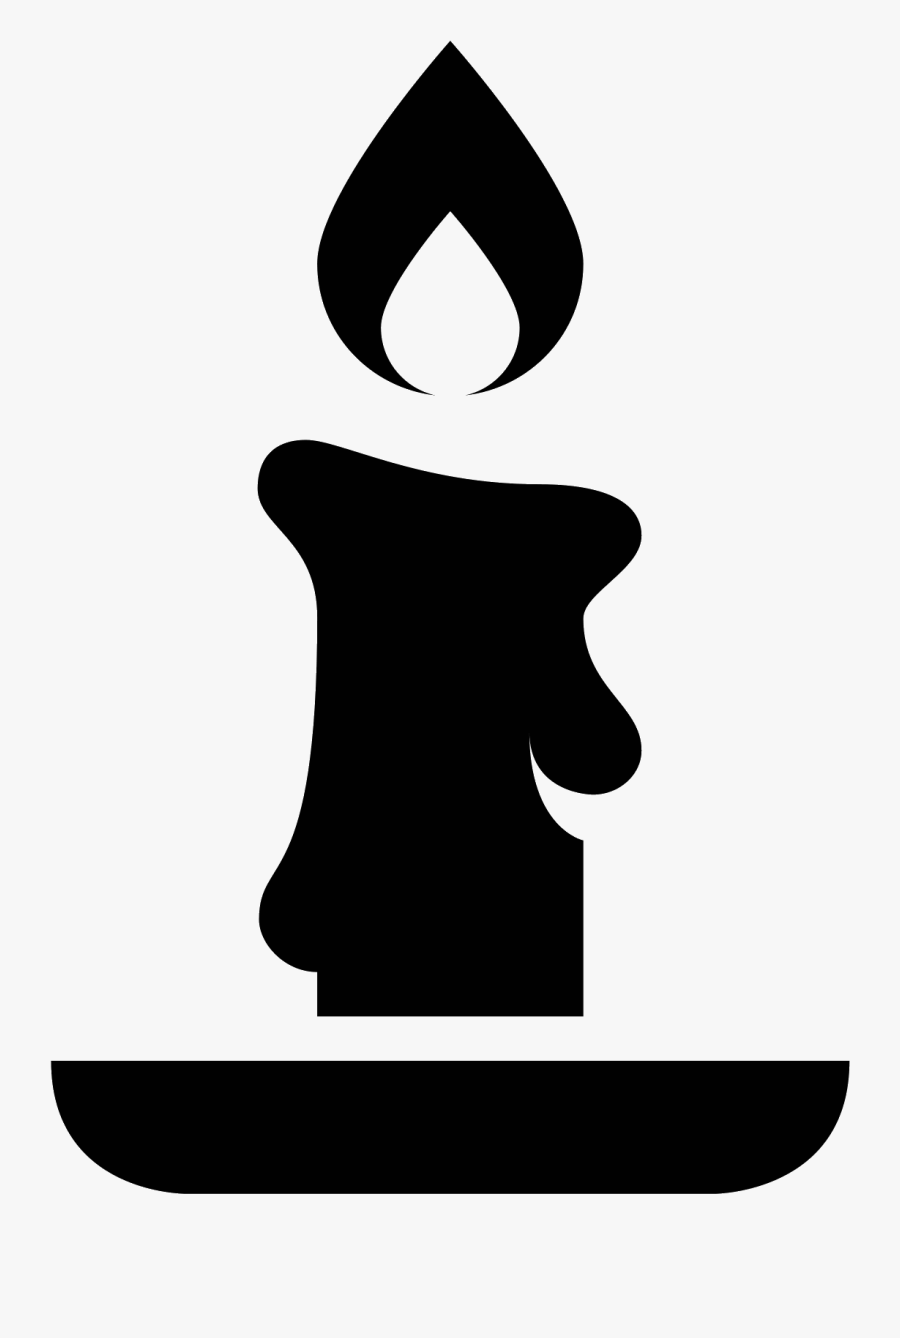 Candle Silhouette At Getdrawings - Candle Sticker Black And White, Transparent Clipart